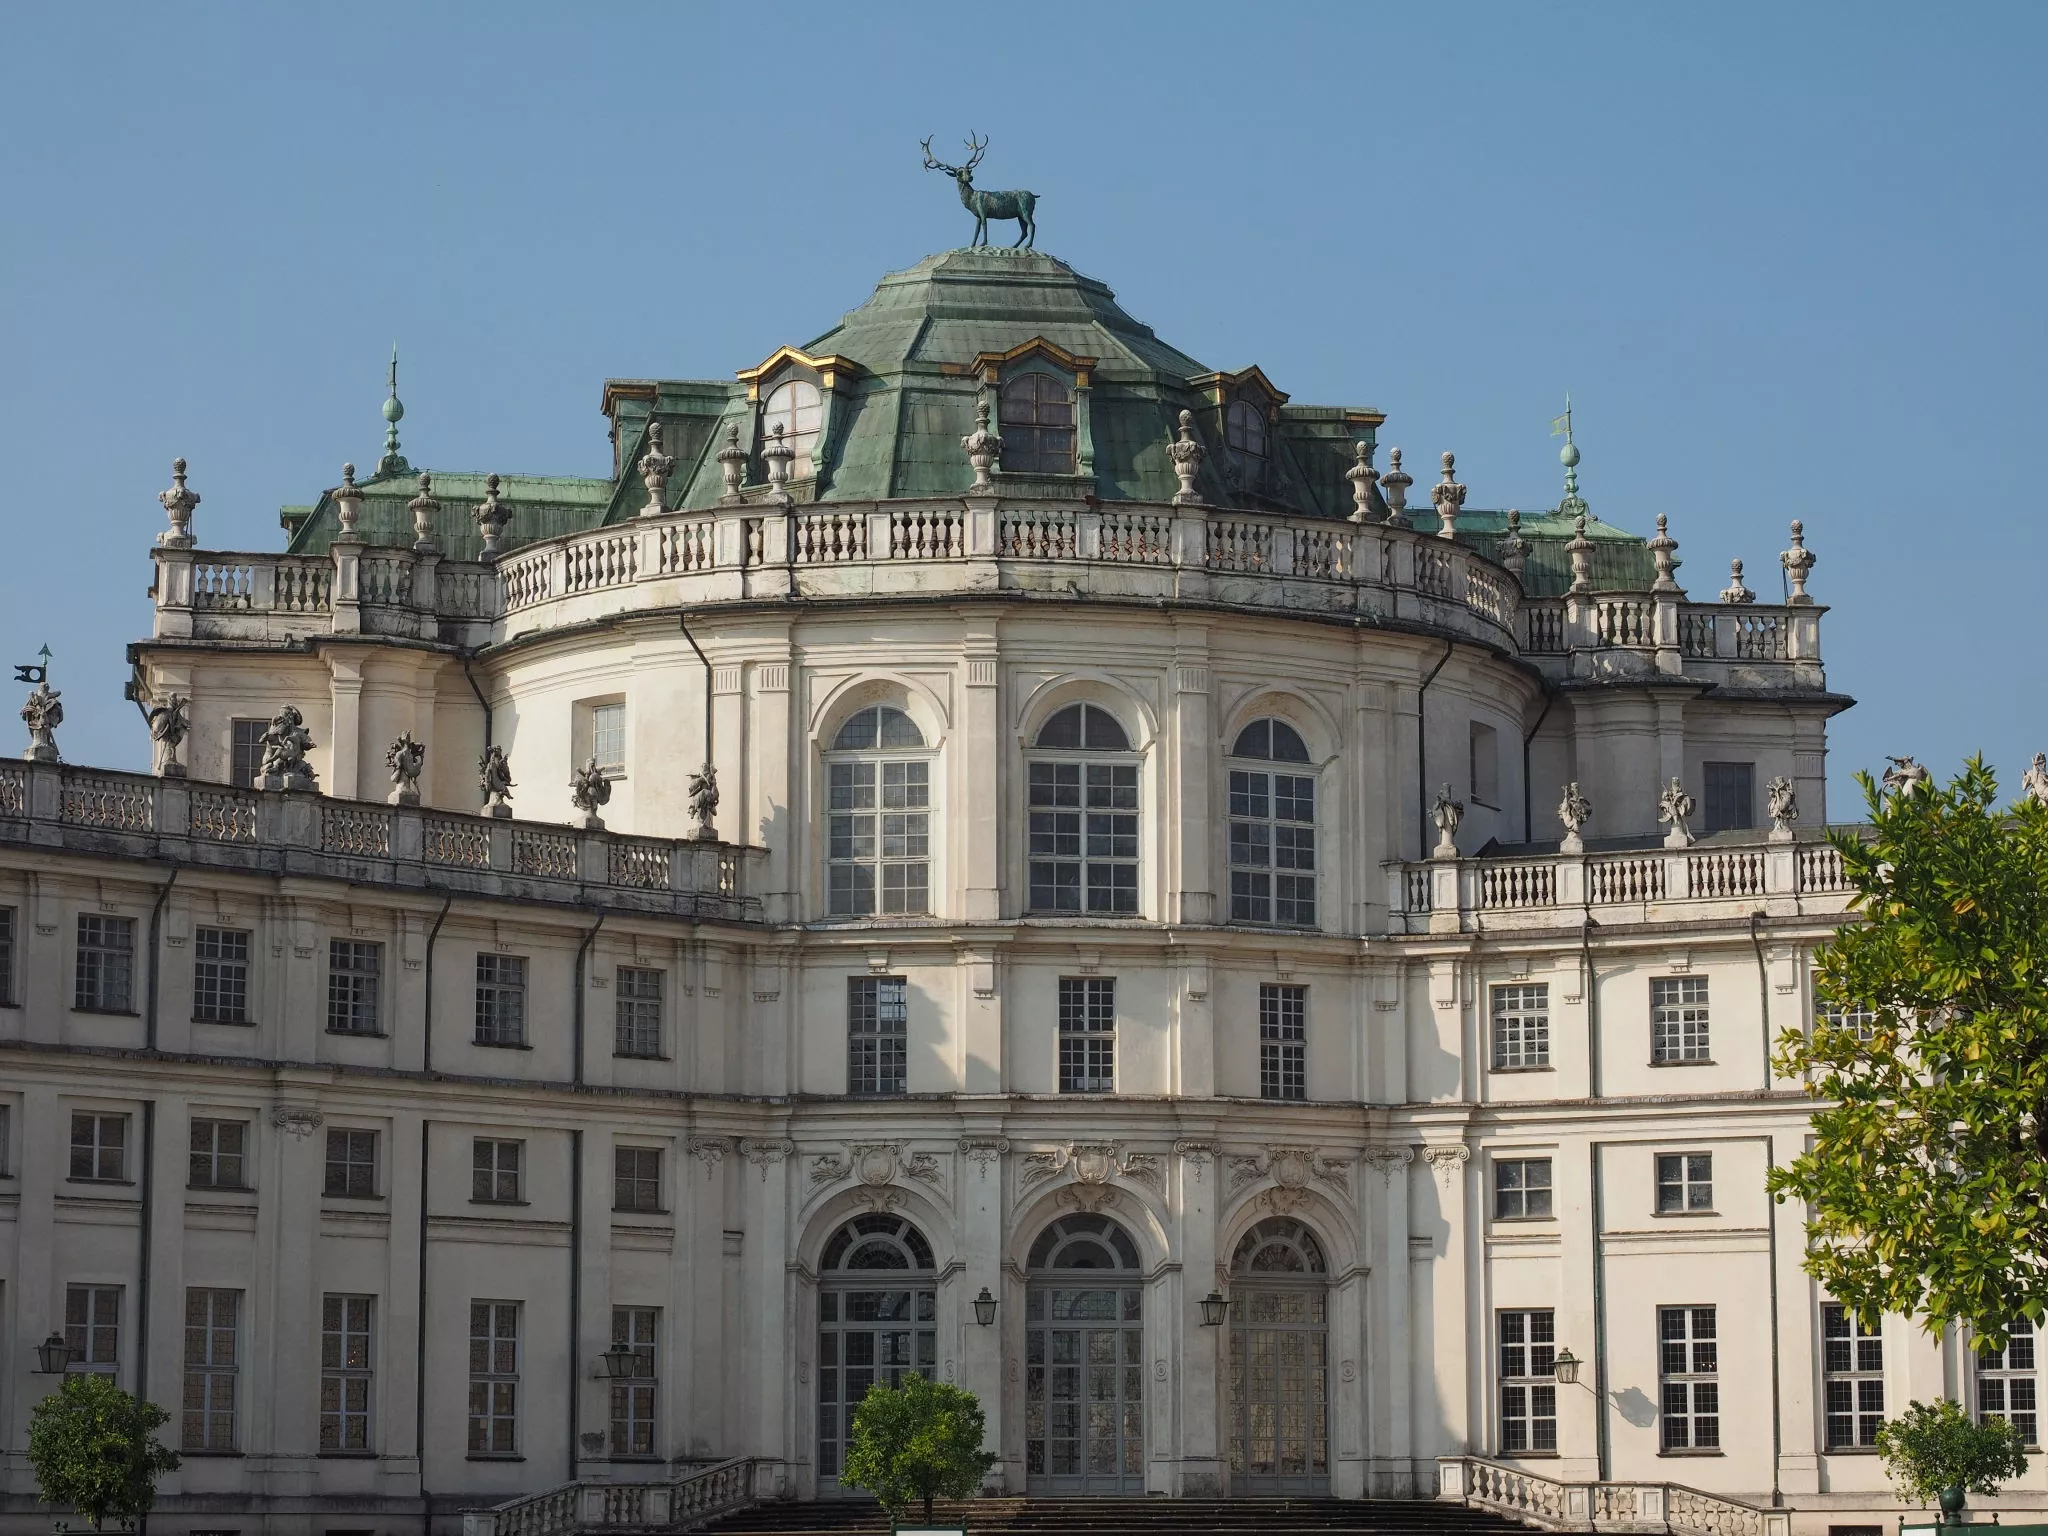 Stupinigi in Italy, Europe | Architecture - Rated 3.7